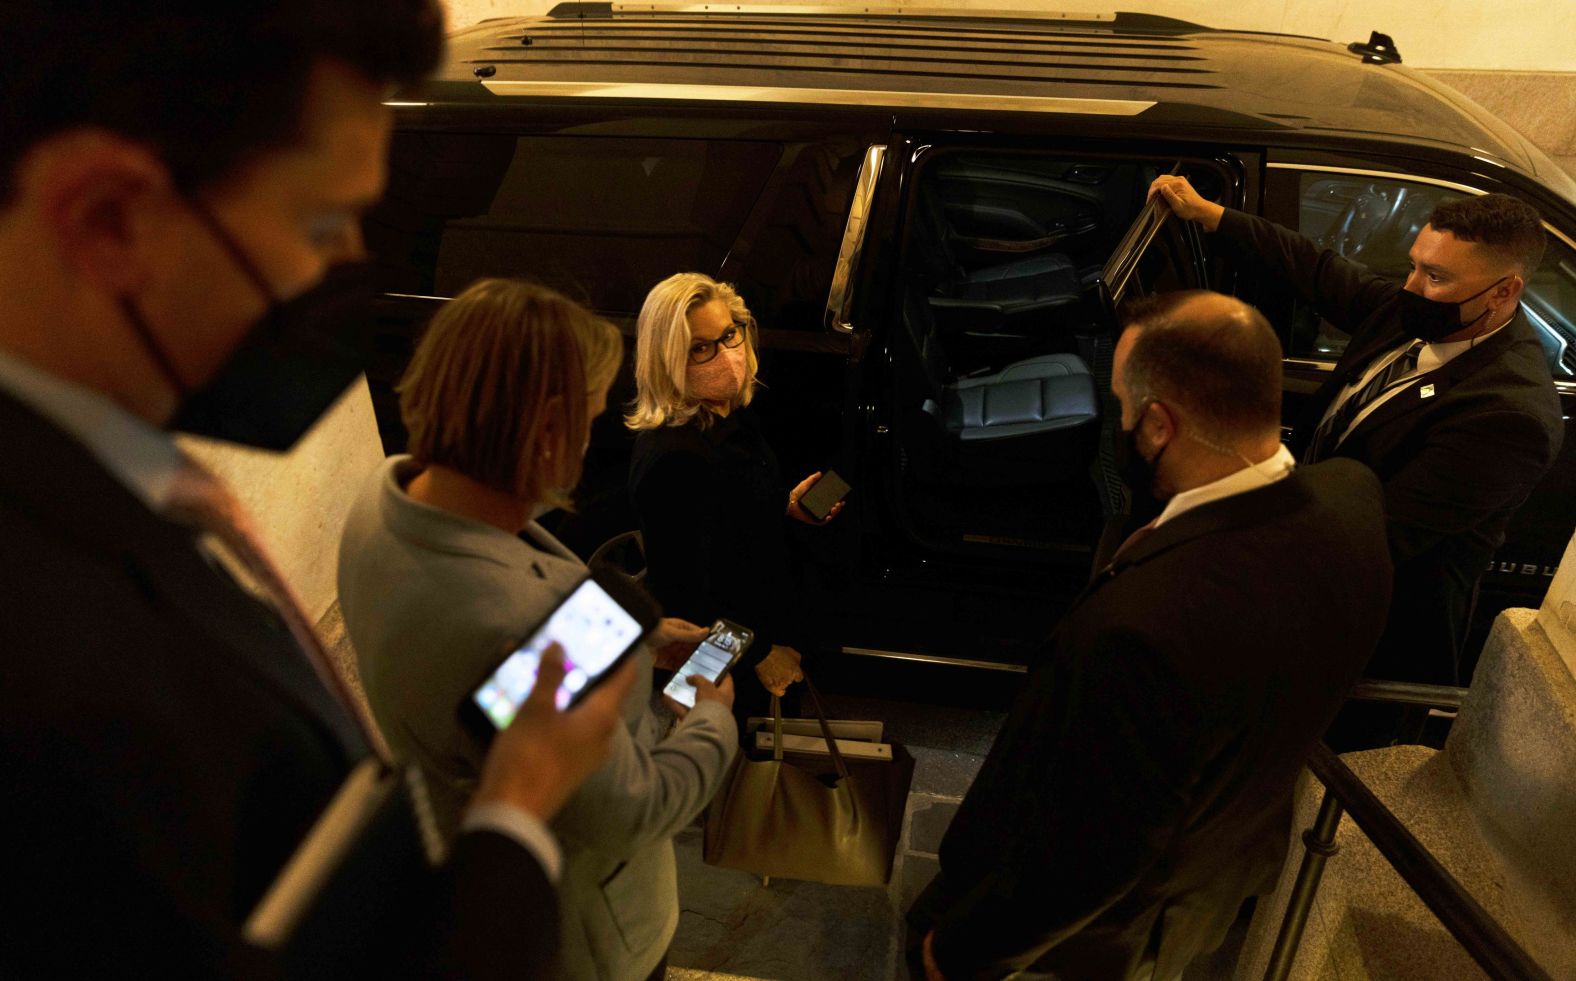 Cheney heads back after her speech Tuesday night. "She's not a yeller and a screamer," photographer David Hume Kennerly said. "As you've seen from her statements, she's very measured. That's just her personality. She's very strong."